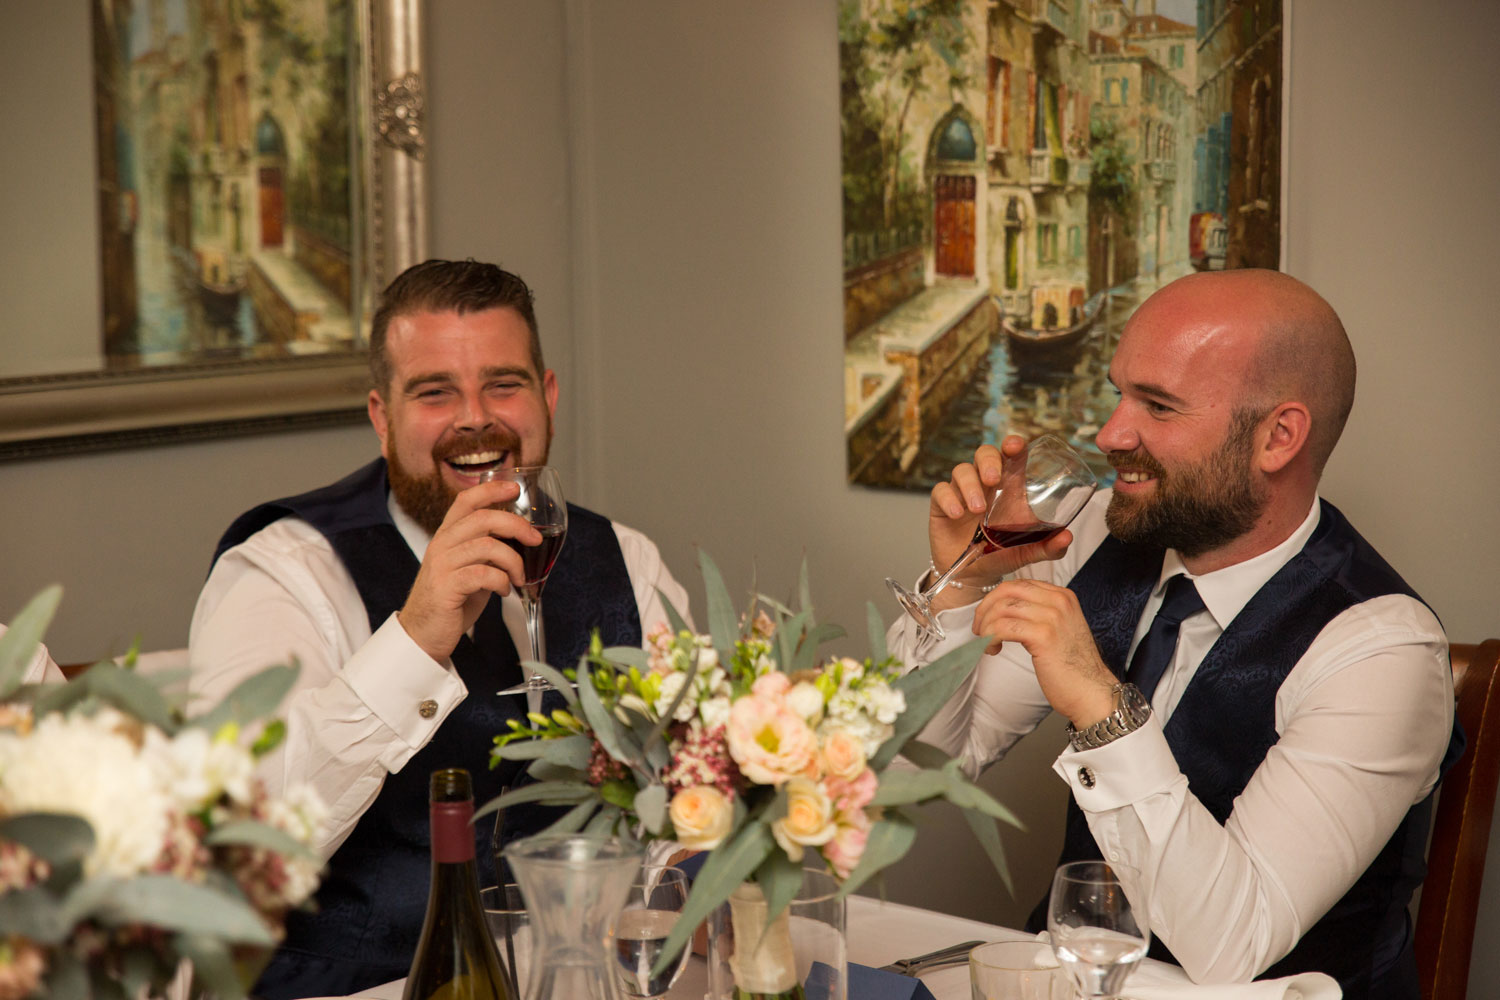 wedding photography auckland groomsmen drinking and laughing